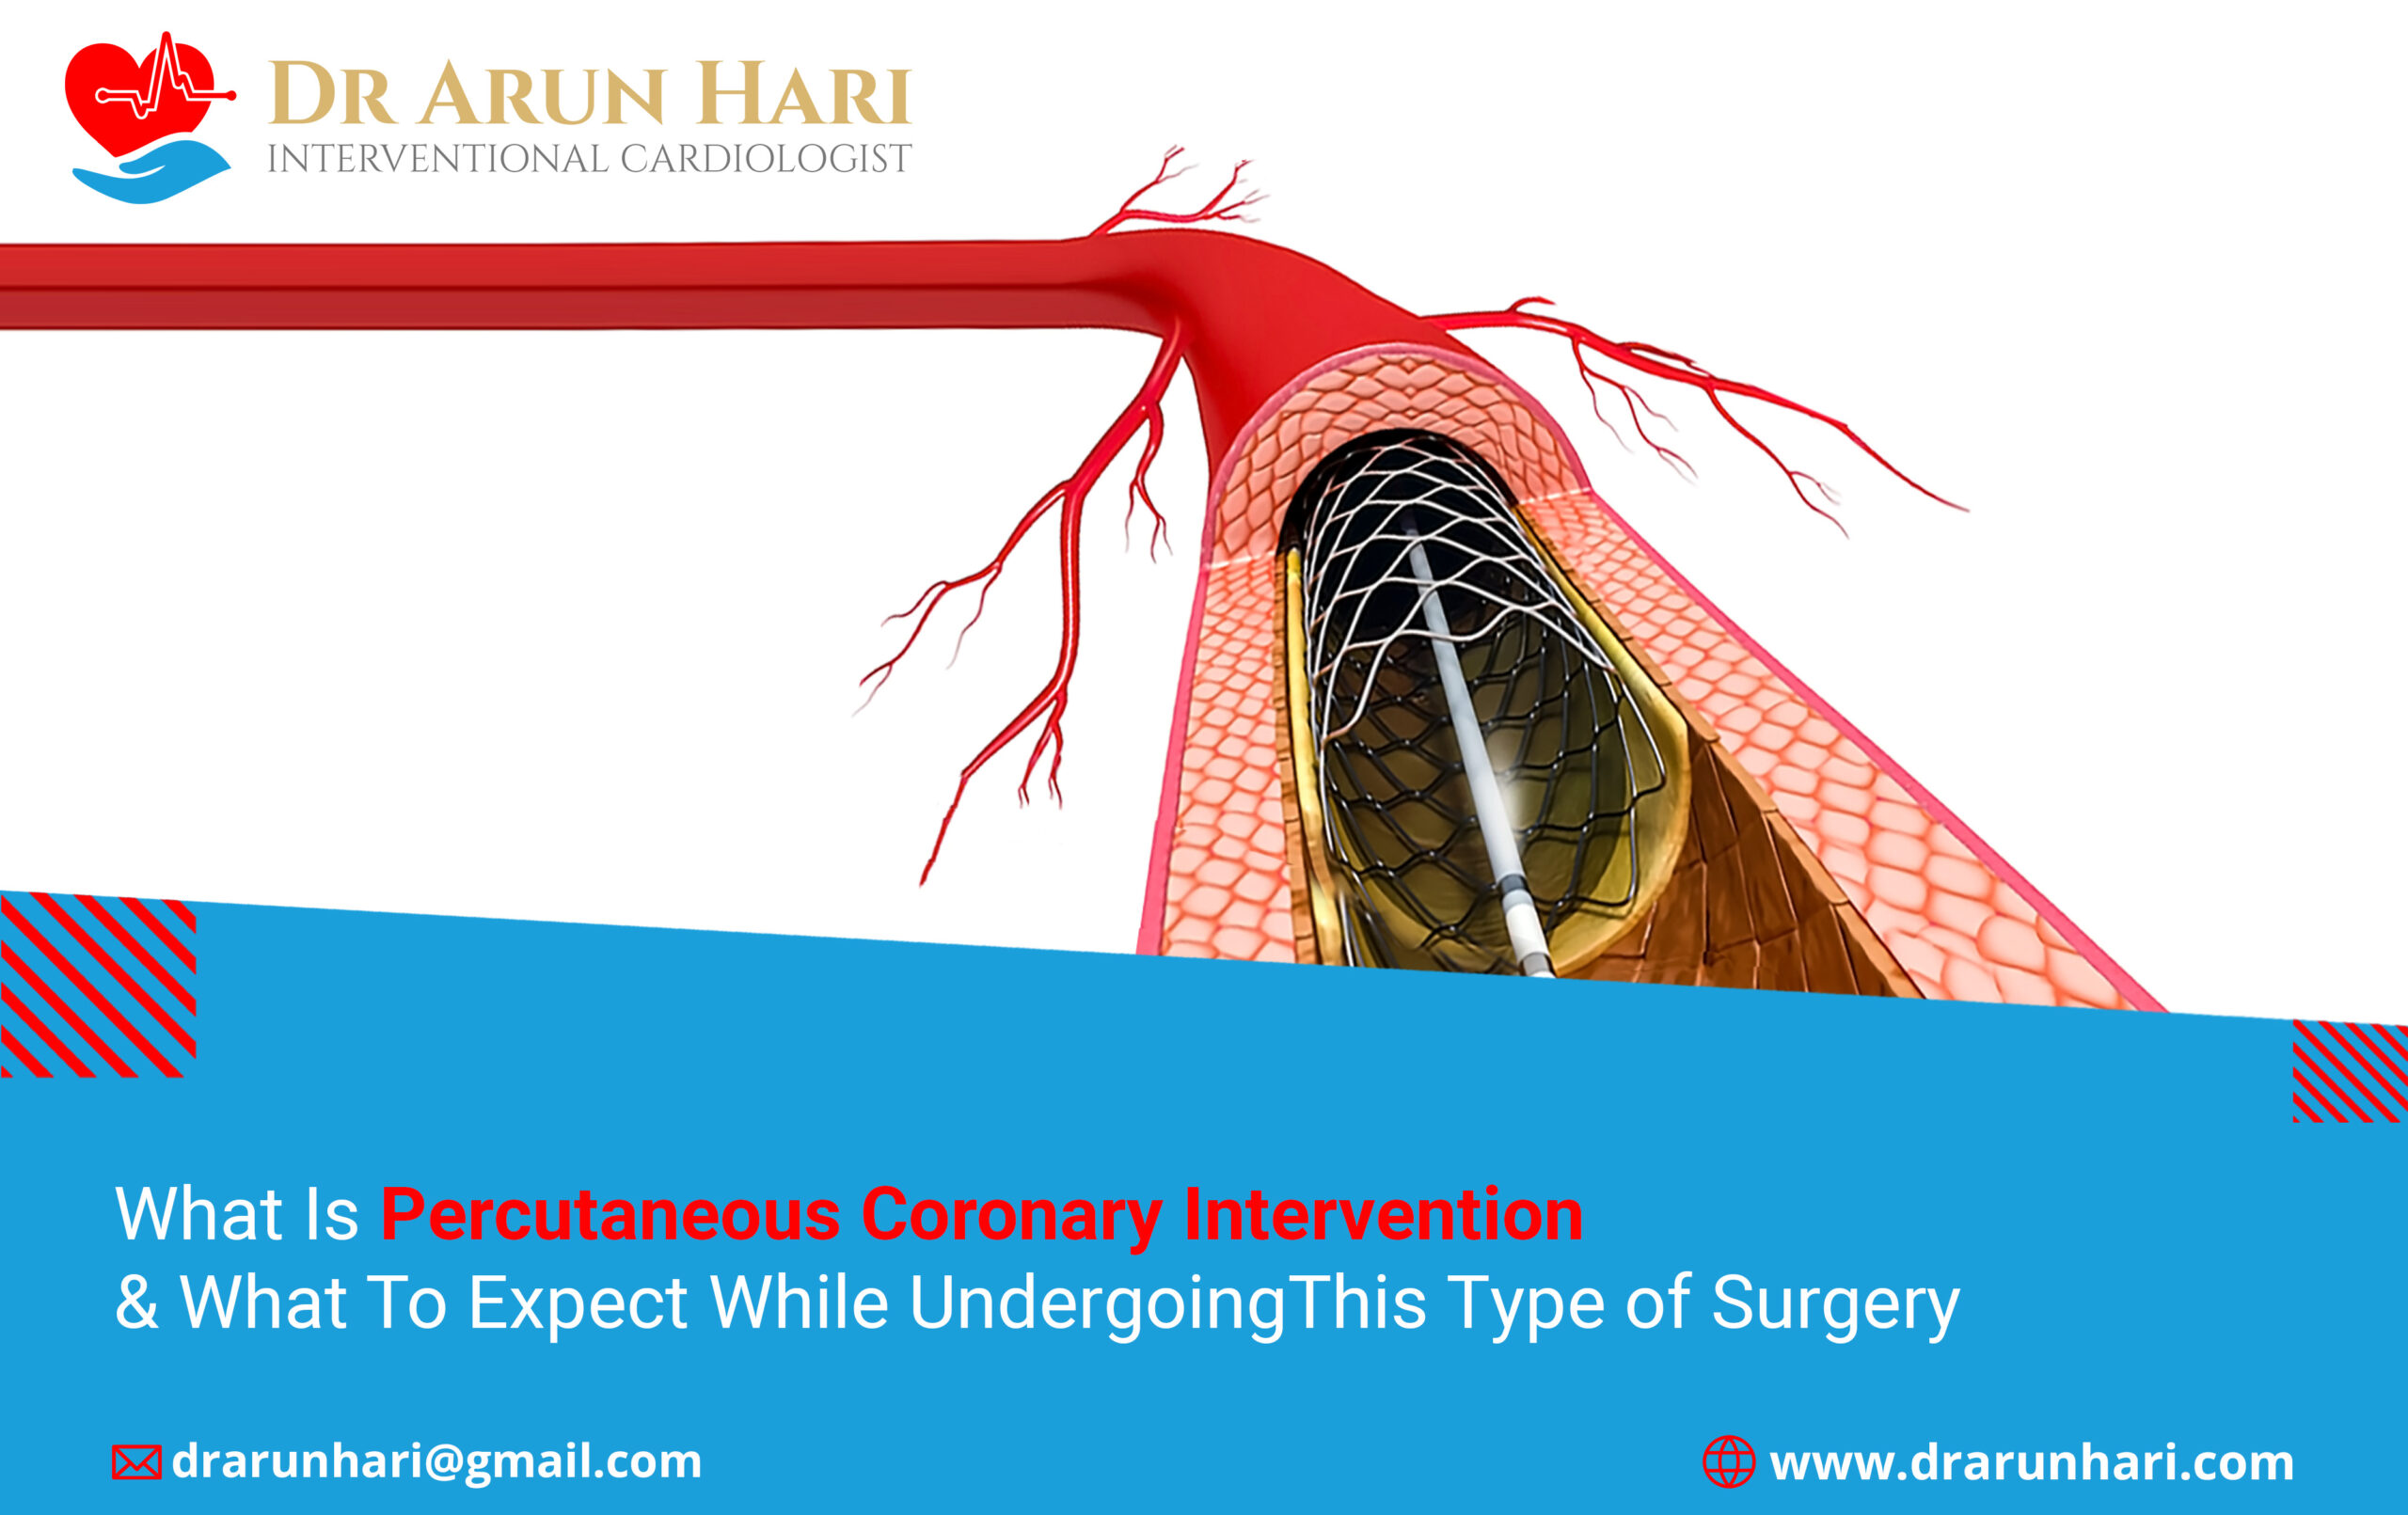 Read more about the article What Is Percutaneous Coronary Intervention & What To Expect While Undergoing This Type of Procedure?